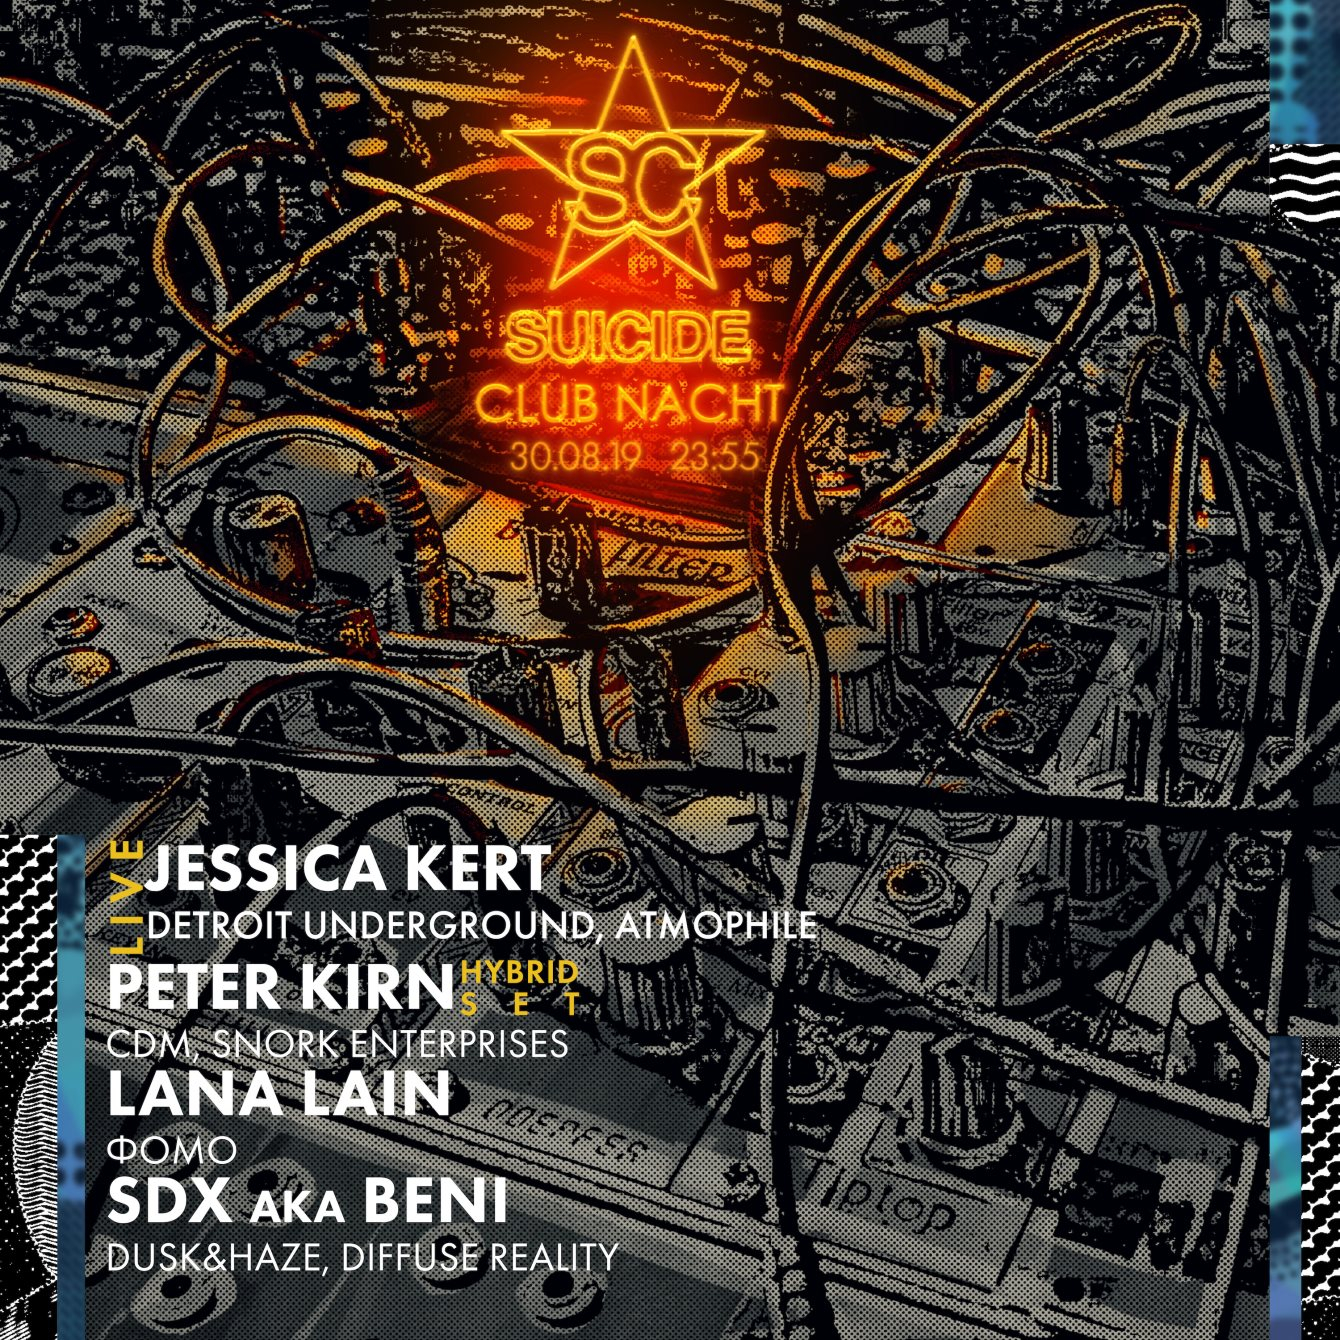 Suicide Club Nacht with Live AV by Jessica Kert and Many More, Open Air + Club - Flyer back